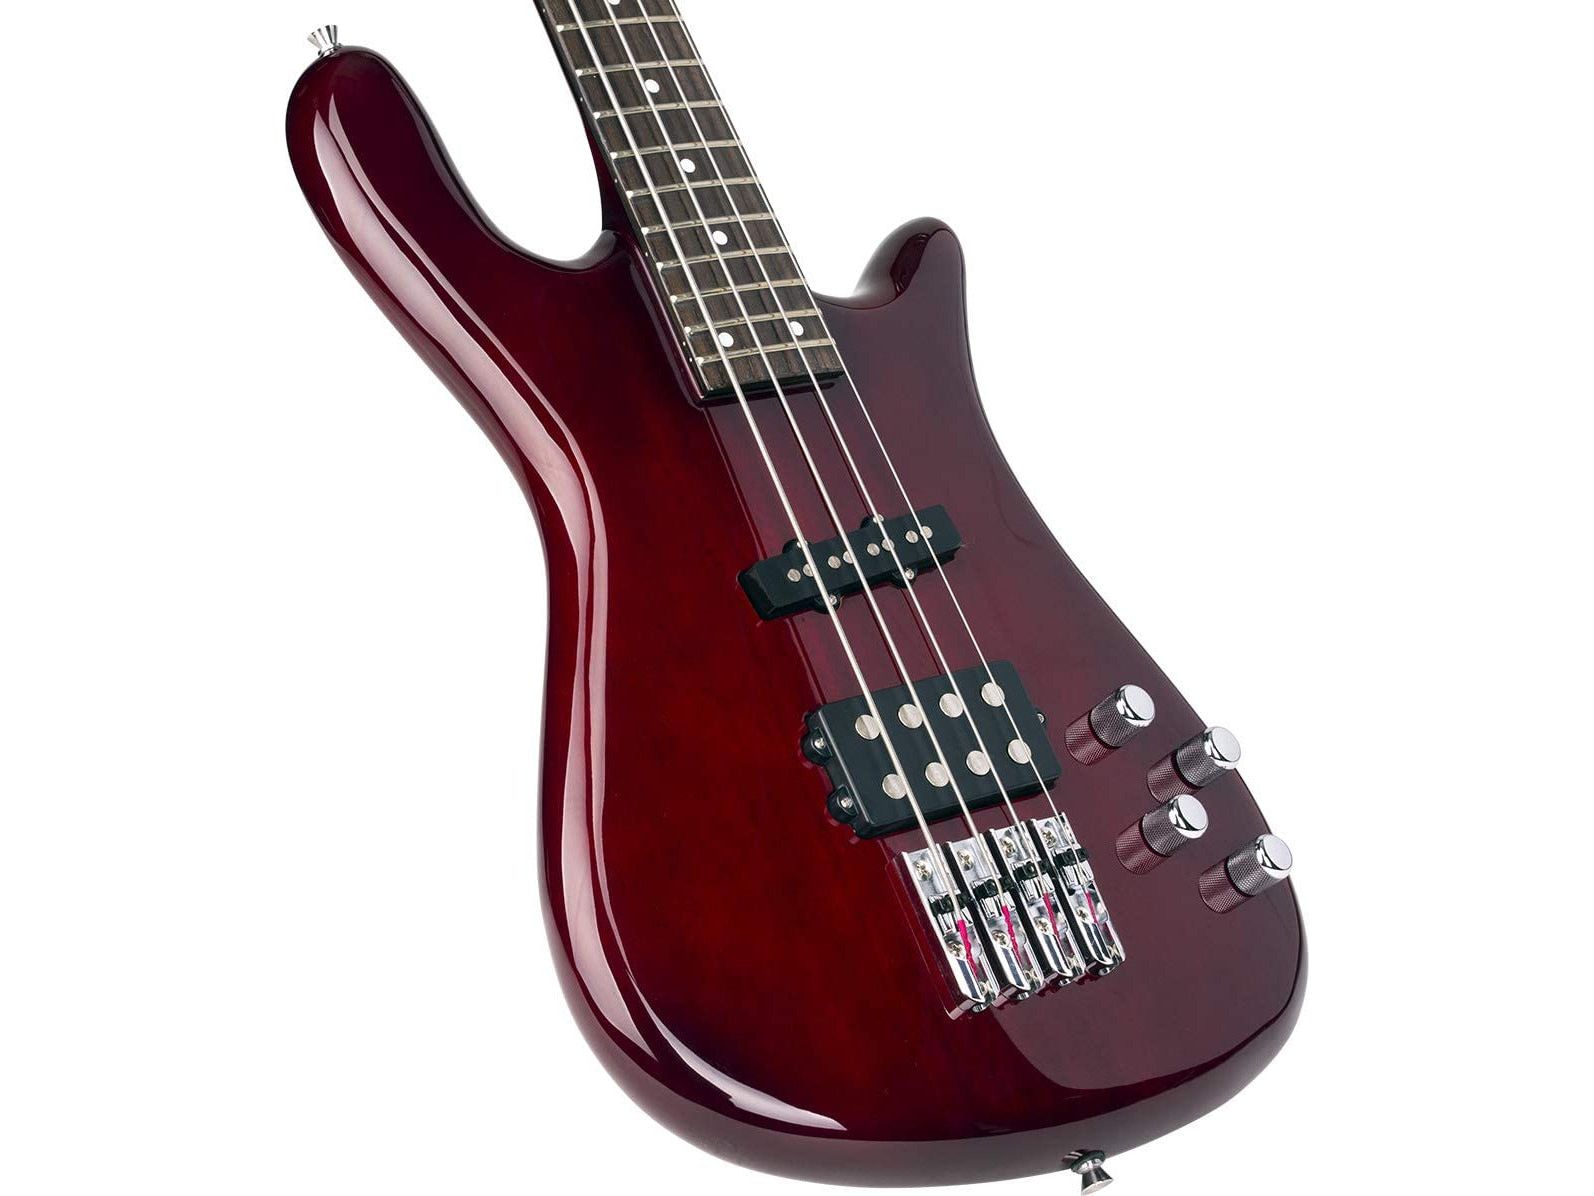 SX Electric Bass Guitar Arched Body in Wine Red Finish